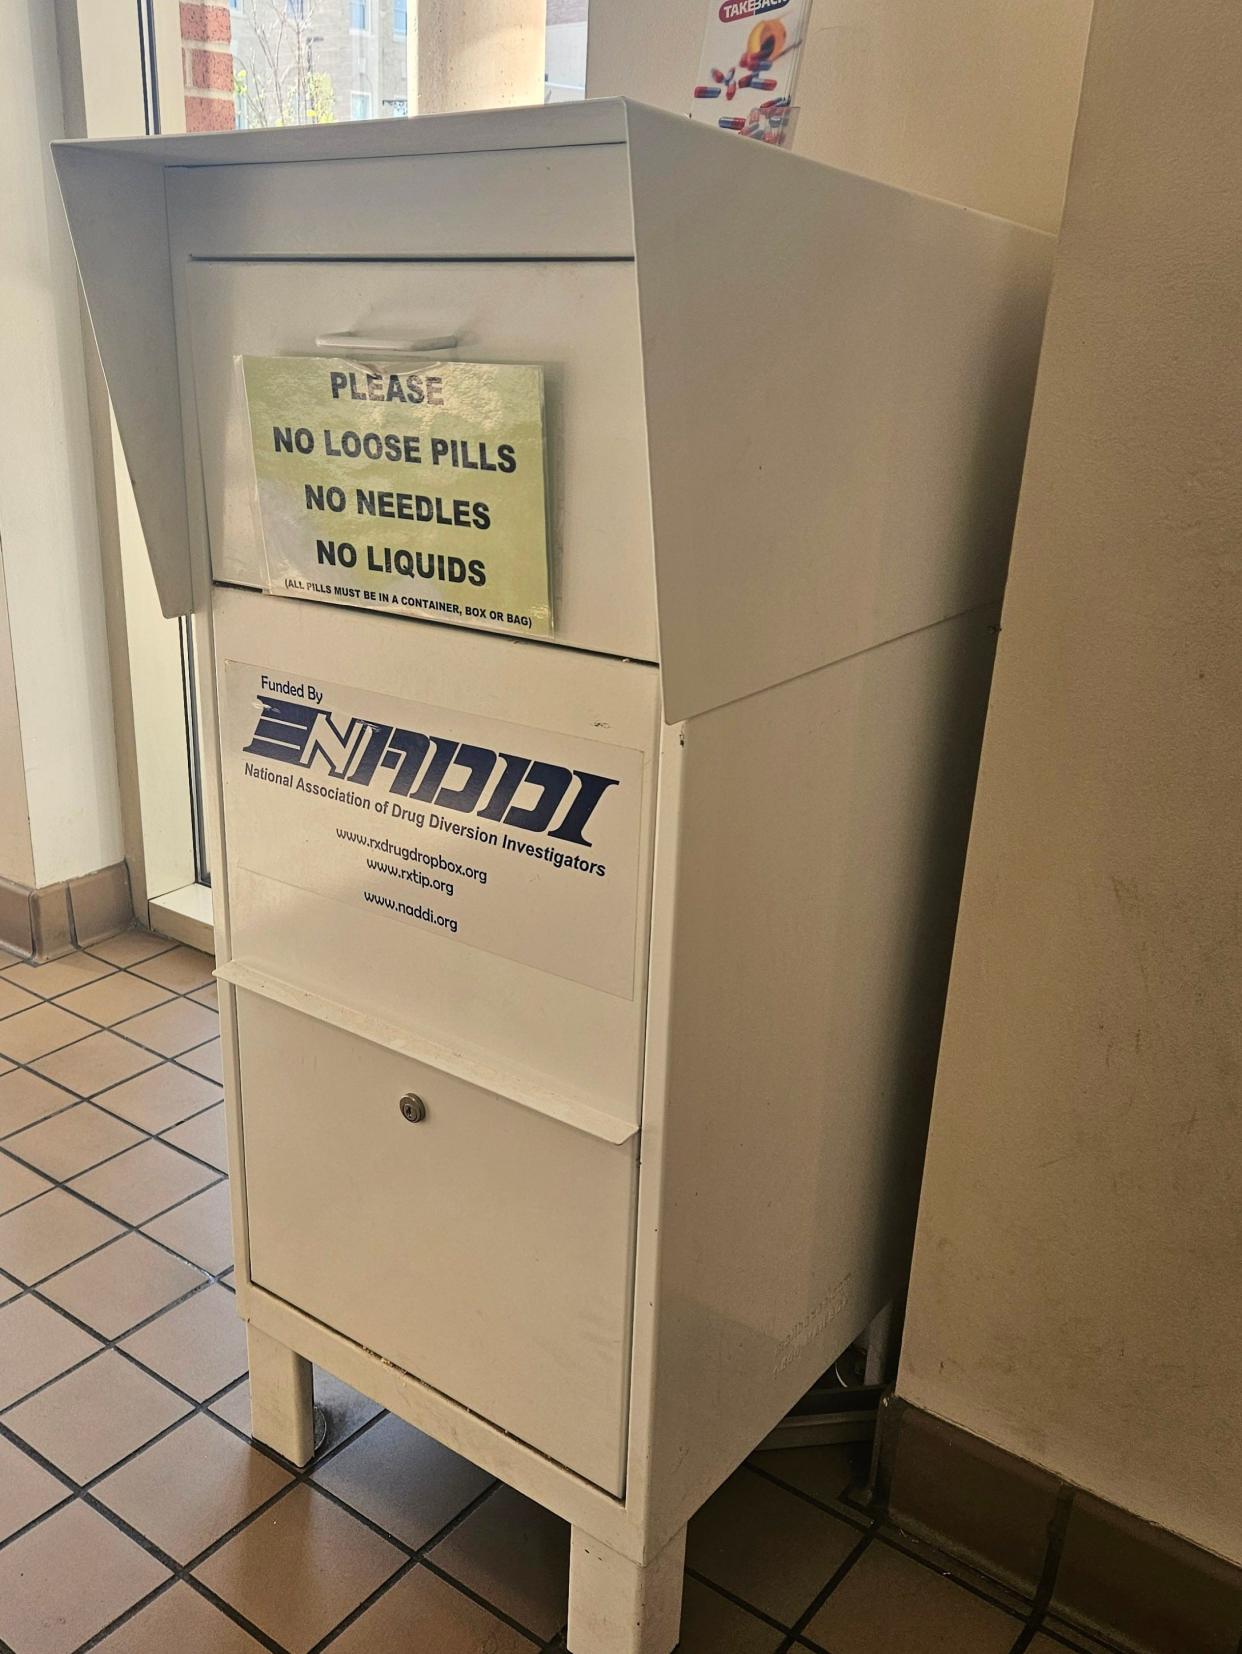 The Law Enforcement Complex in Ross County has a drug takeback box for community members to drop in pills and illegal substances to be properly disposed of.